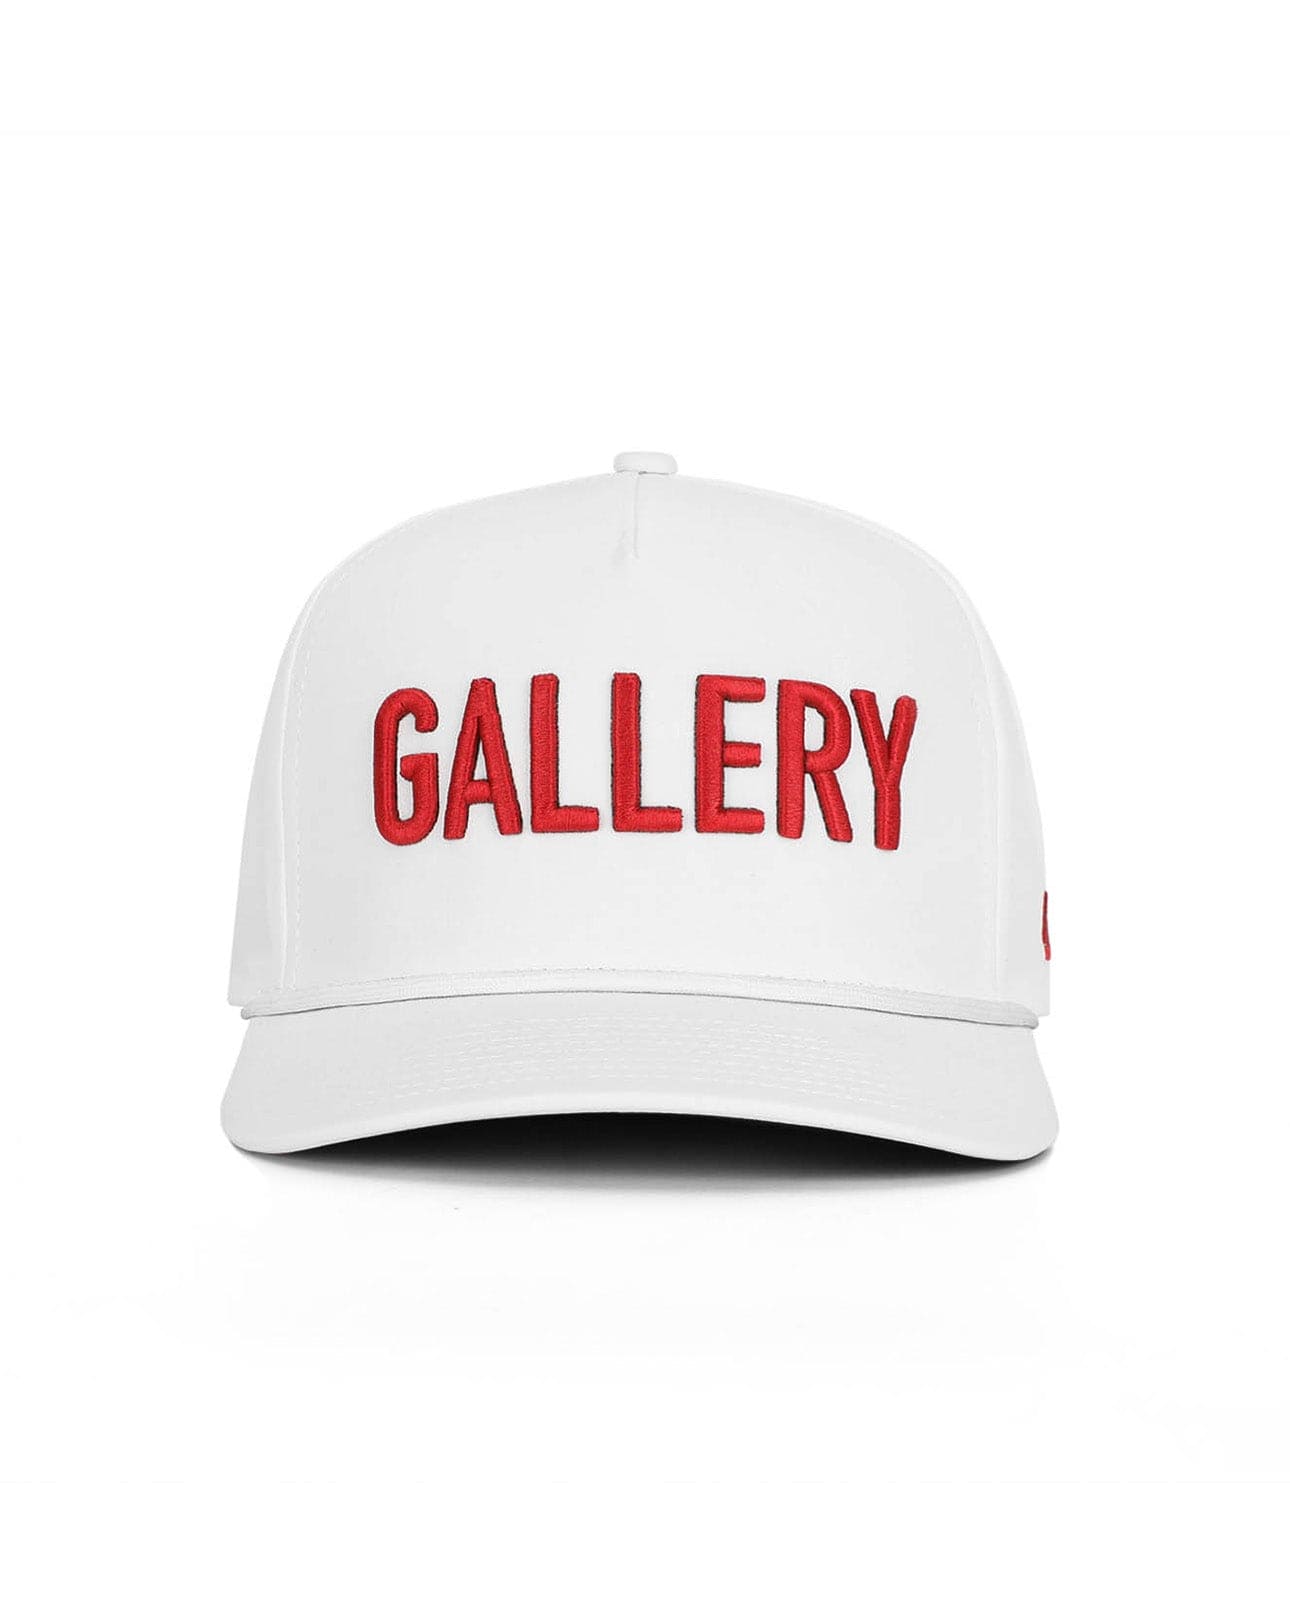 GALLERY PLAYERS HAT - WHITE/RED